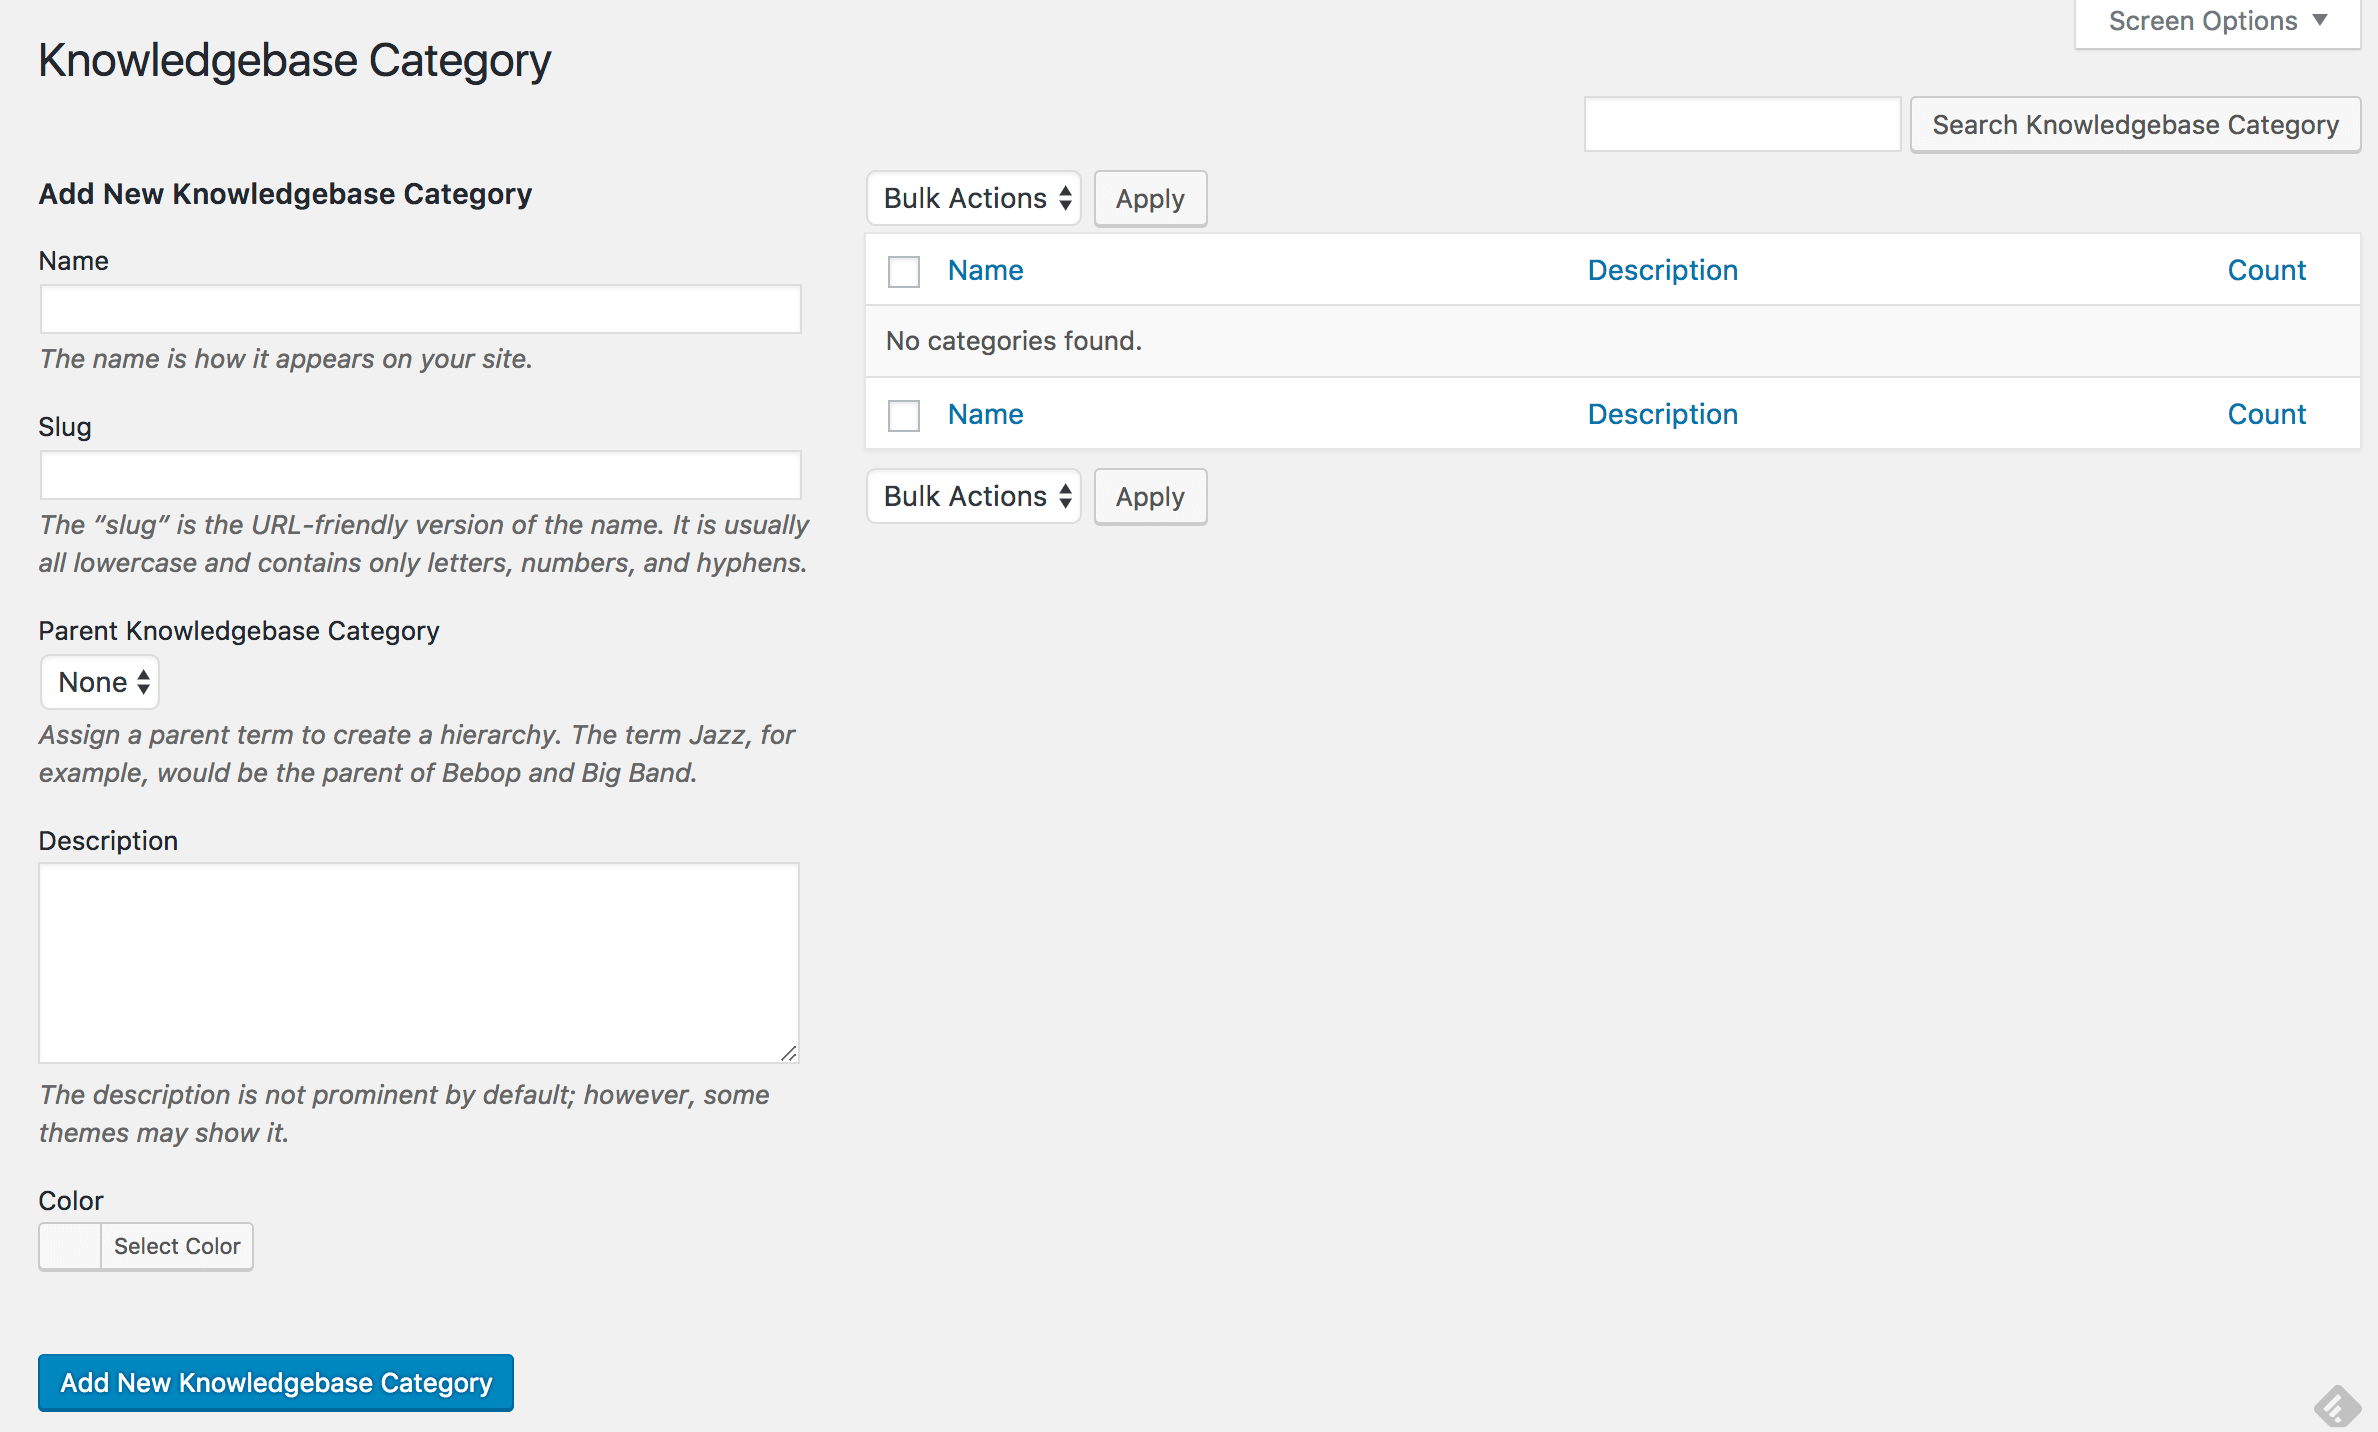 New knowledge base category interface